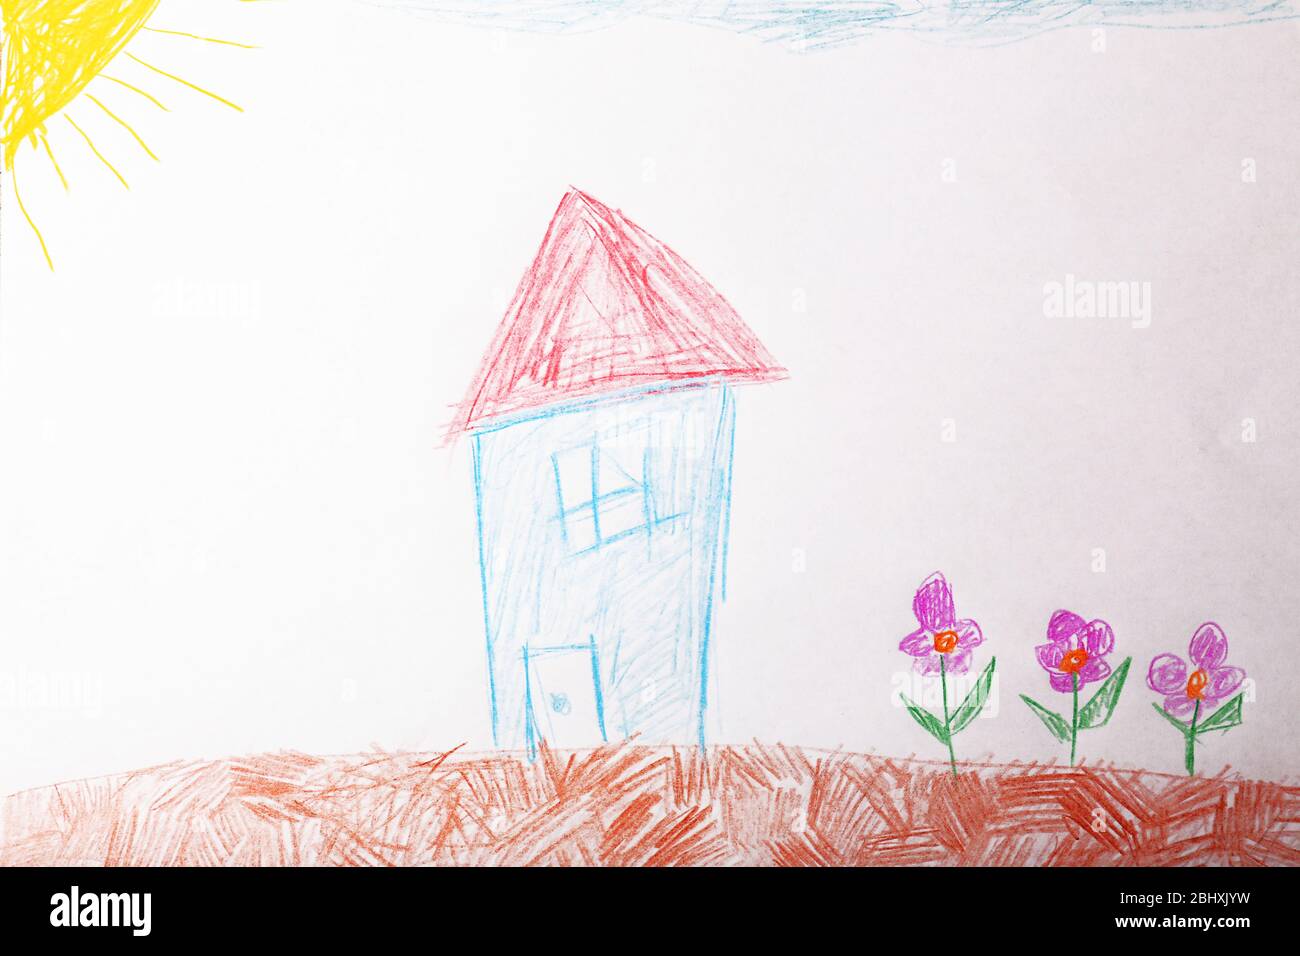 Kids drawing on white sheet of paper background Stock Photo by